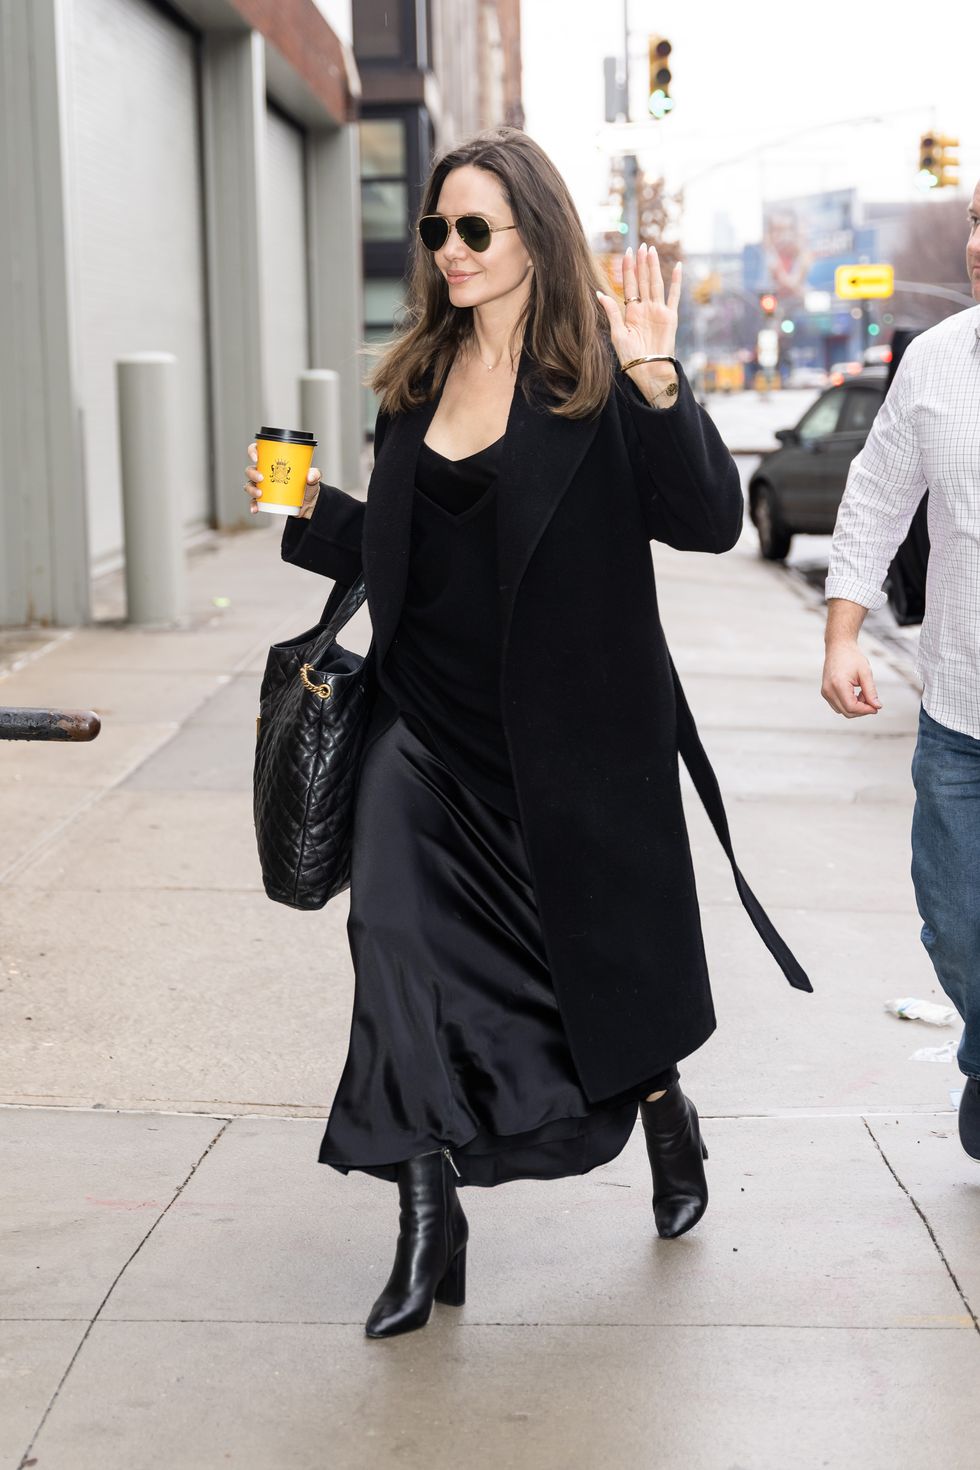 Angelina Jolie Elevated This All-Black Look by Wearing Her Go-To Accessory